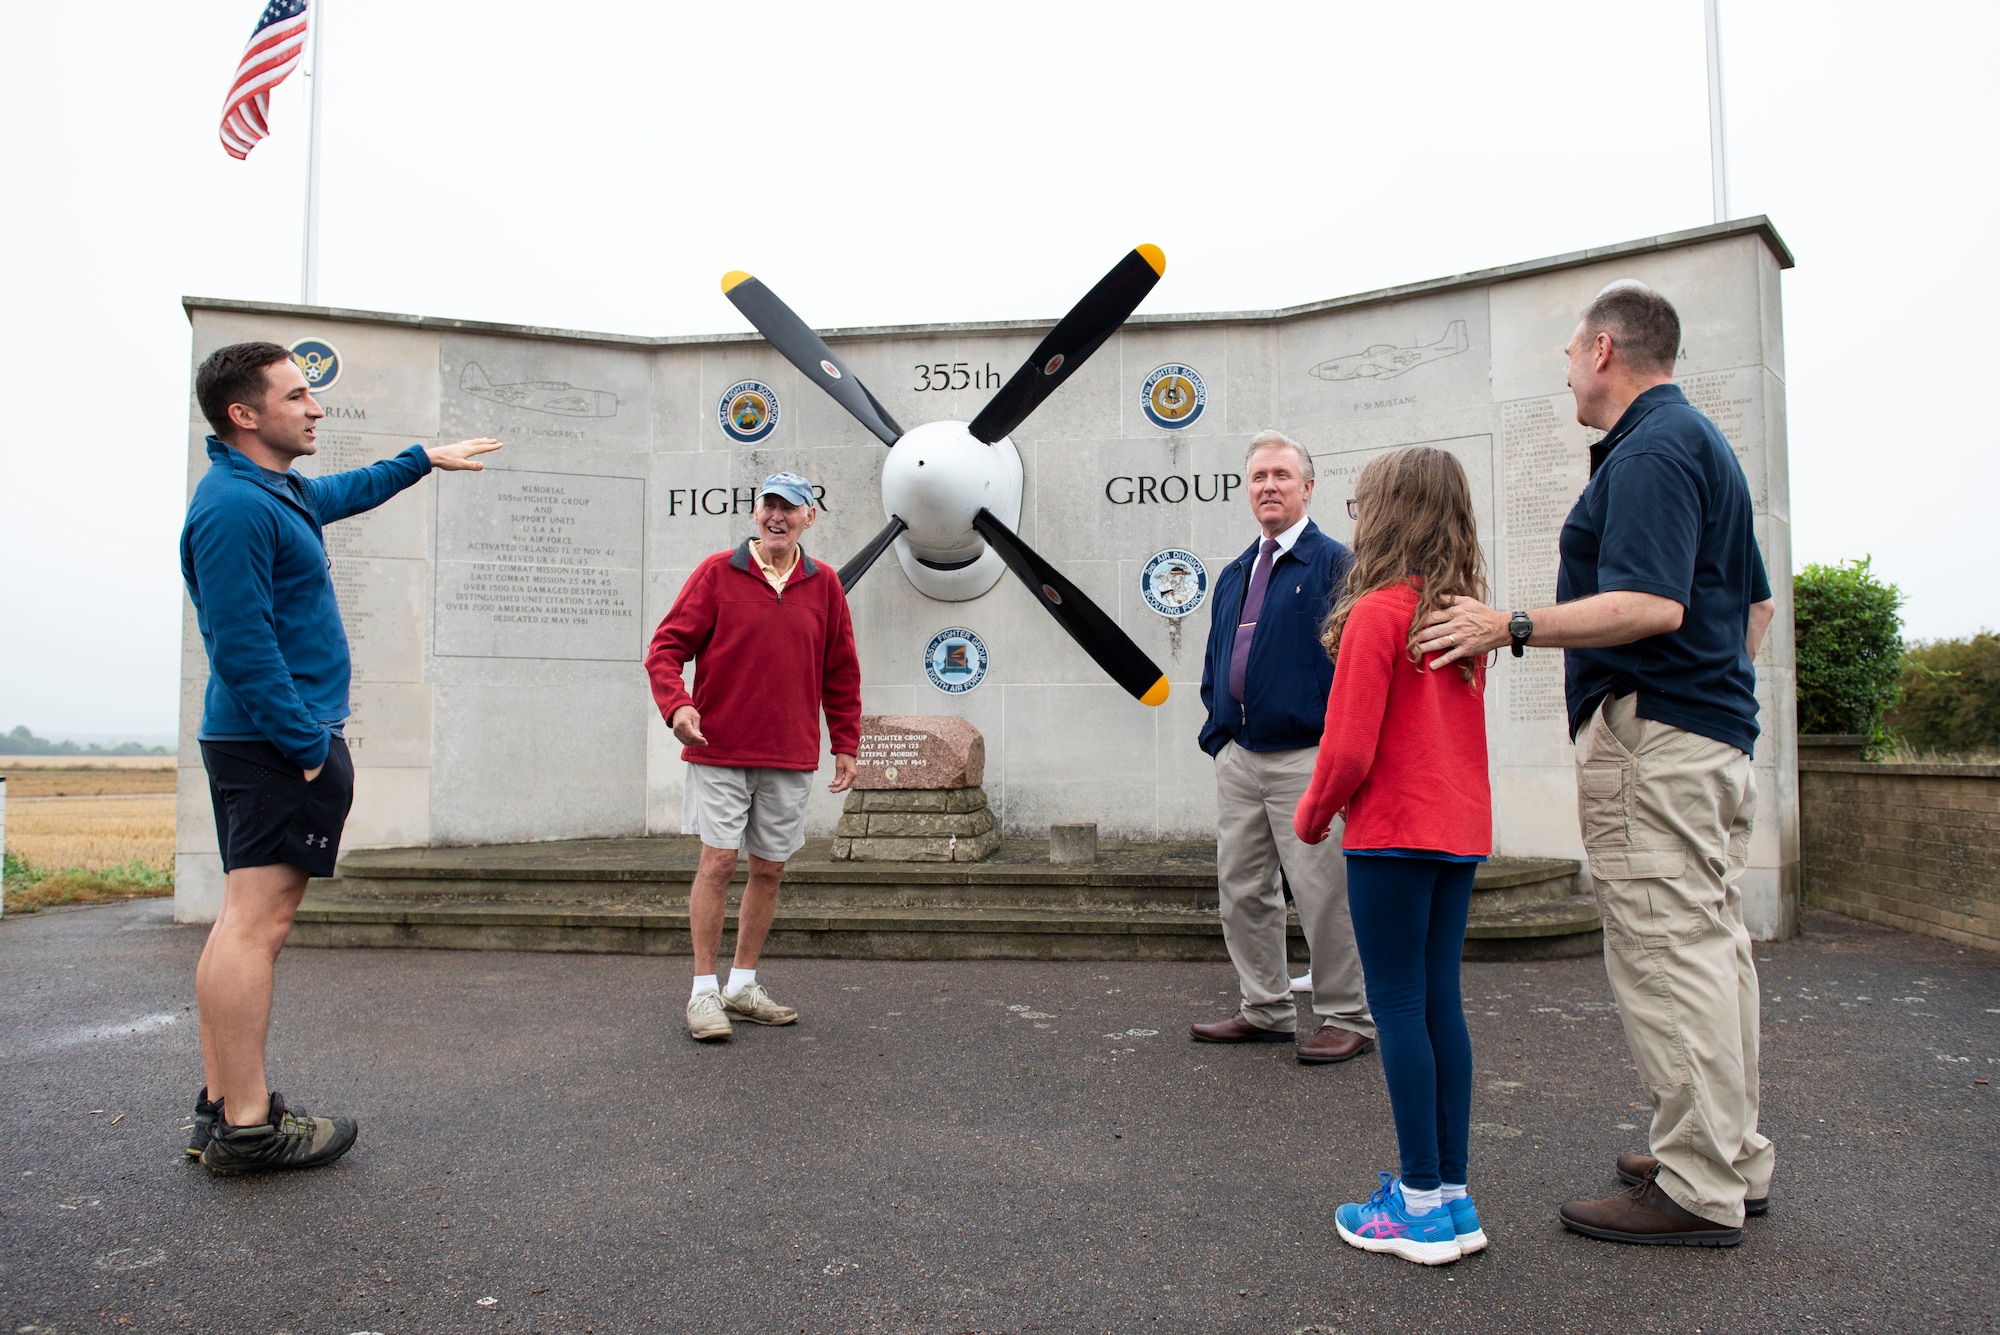 U.S. Army Capt. Chris Philhower (left), U.S. Africa Command Directorate for Intelligence at RAF Molesworth technician, speaks with David Crow (second from left), a local from Steeple Morden who helped build the memorial, during Operation TORCH-2020 memorial cleanup August 15, 2020. U.S. Africa Command Directorate for Intelligence at RAF Molesworth partnered with the American Battle Monuments Commission to host Operation TORCH-2020, where over 50 military members and their families, U.K. nationals and Boy Scout Troop #245, cleaned six WWII memorial sites to preserve American service member legacies and promote an appreciation of past American heroes among present-day USAFRICOM workforce and families. (U.S. Air Force Photo by Airman 1st Class Jennifer Zima)